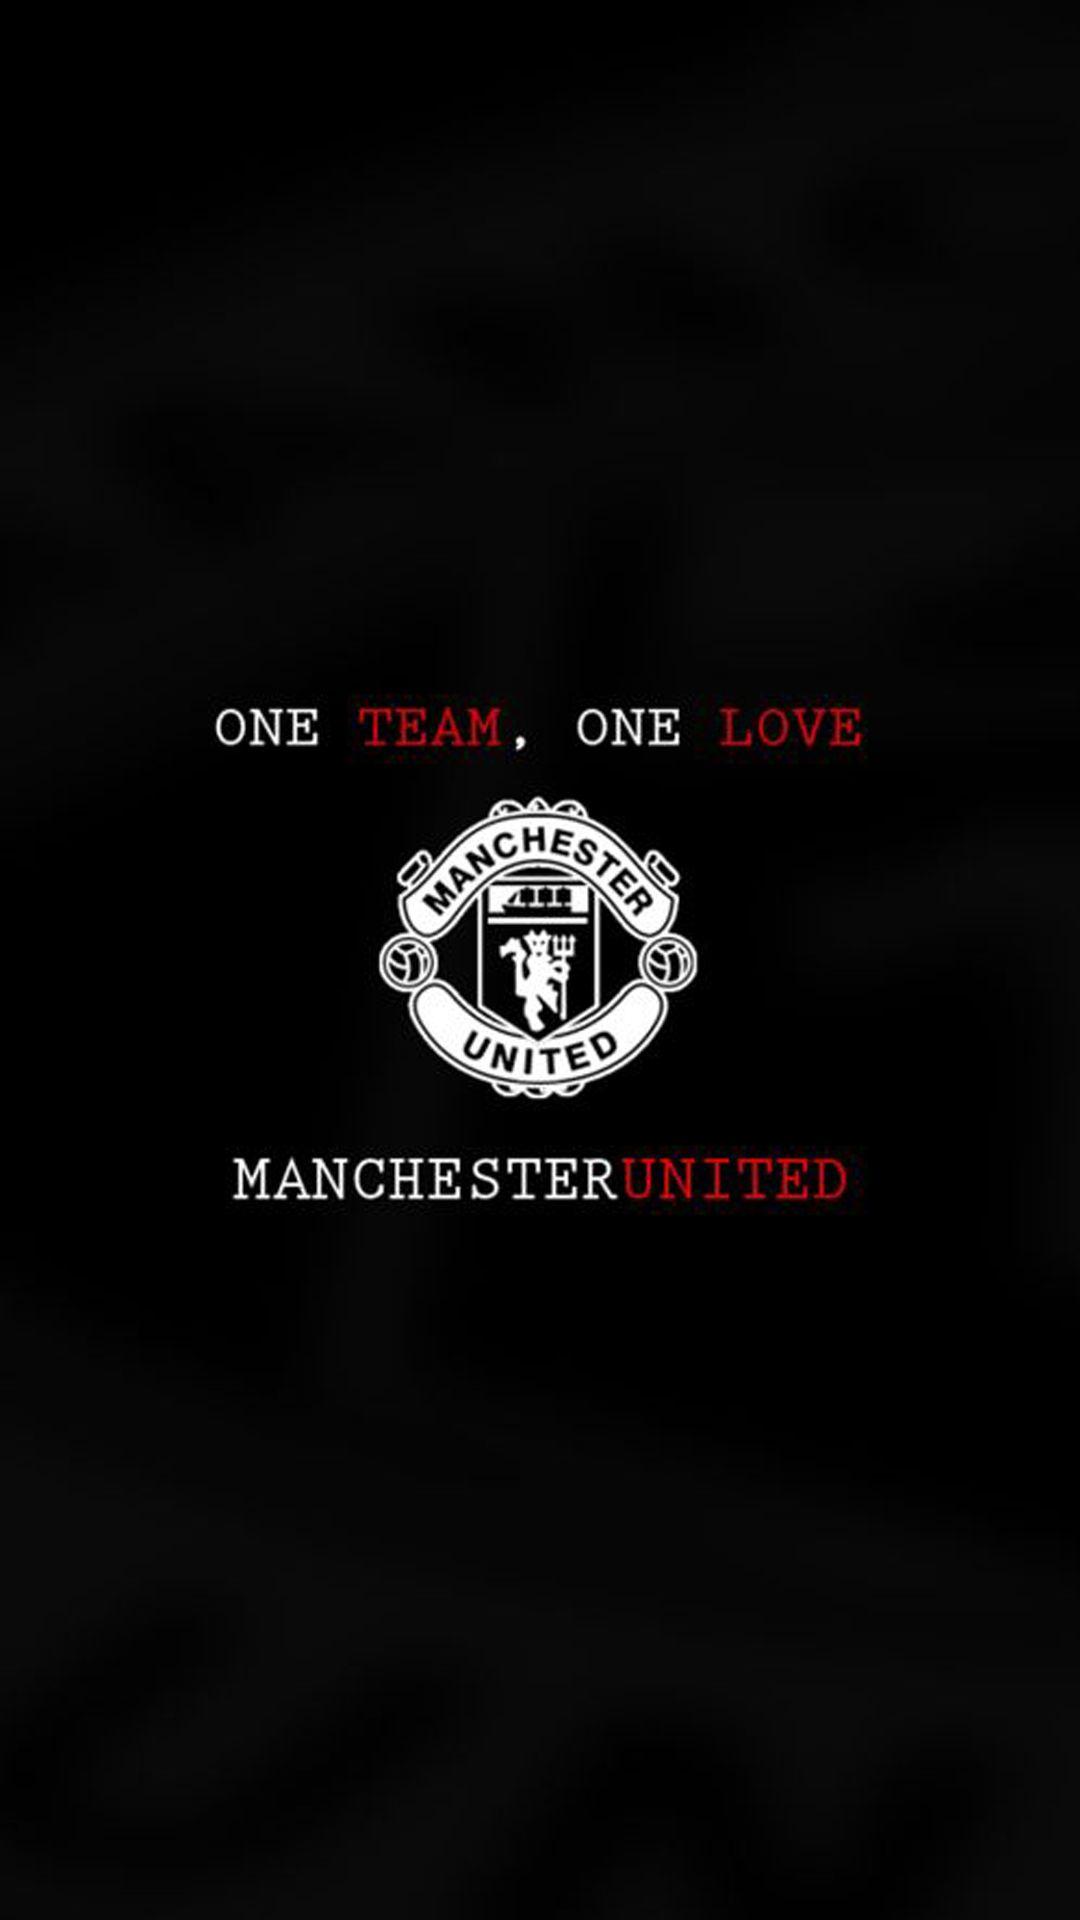 Apple iPhone 7 Plus HD Wallpaper with MUFC Manchester United